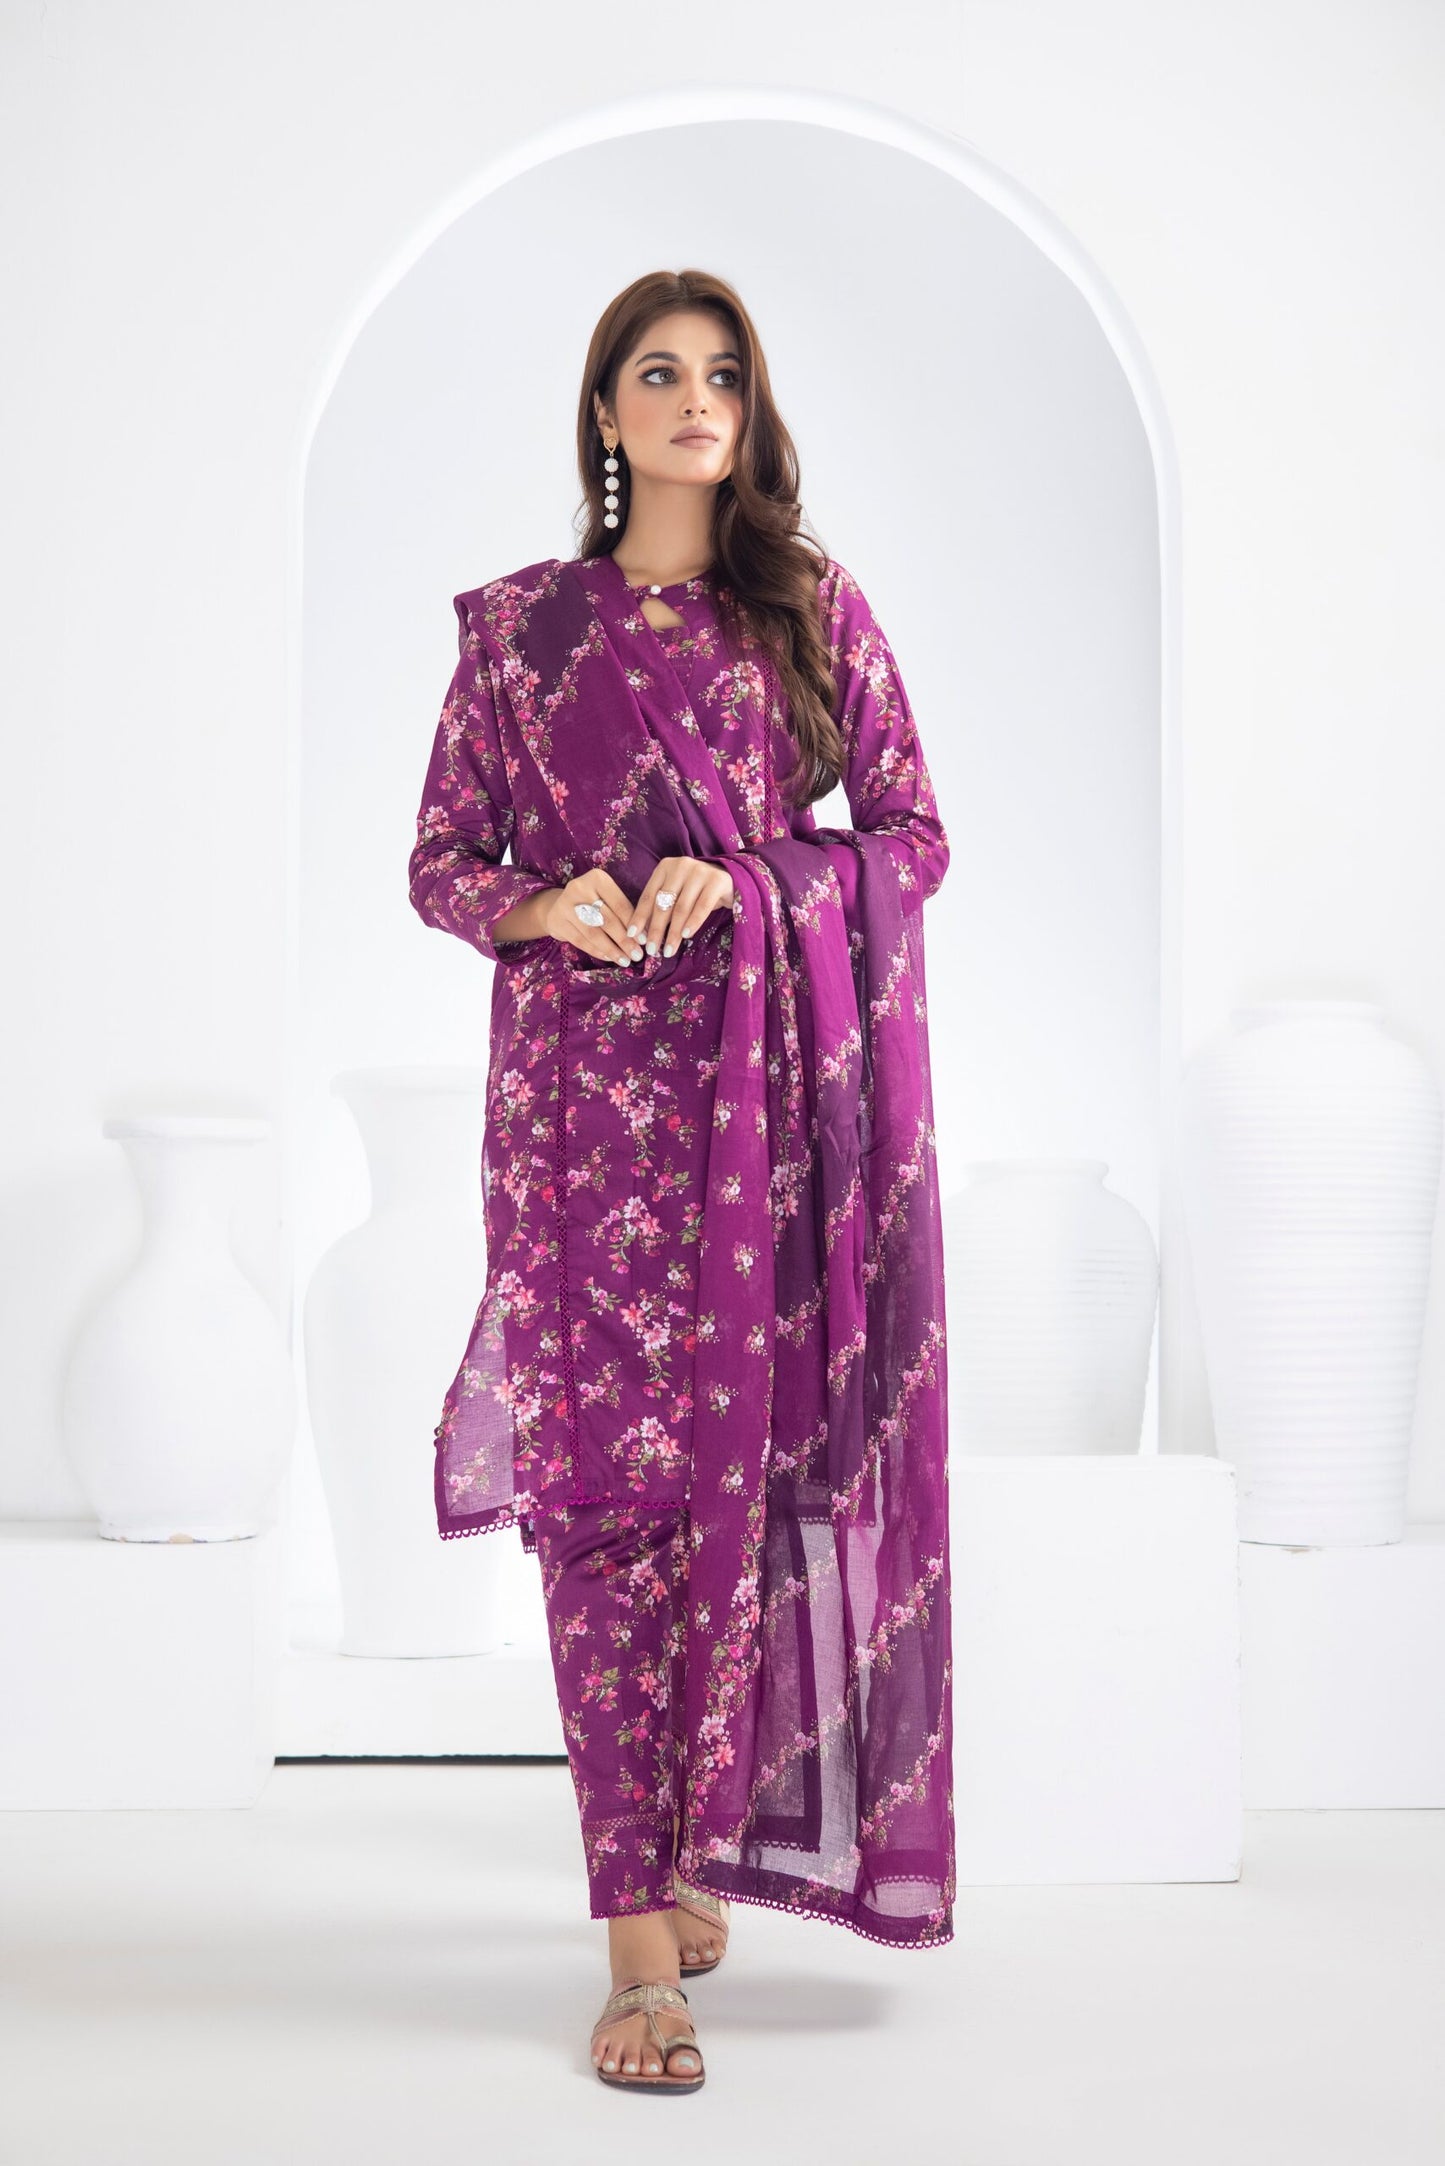 Identic Separates Printed Lawn 3 piece Unstitched dress - IDS-10-04 - Summer Collection